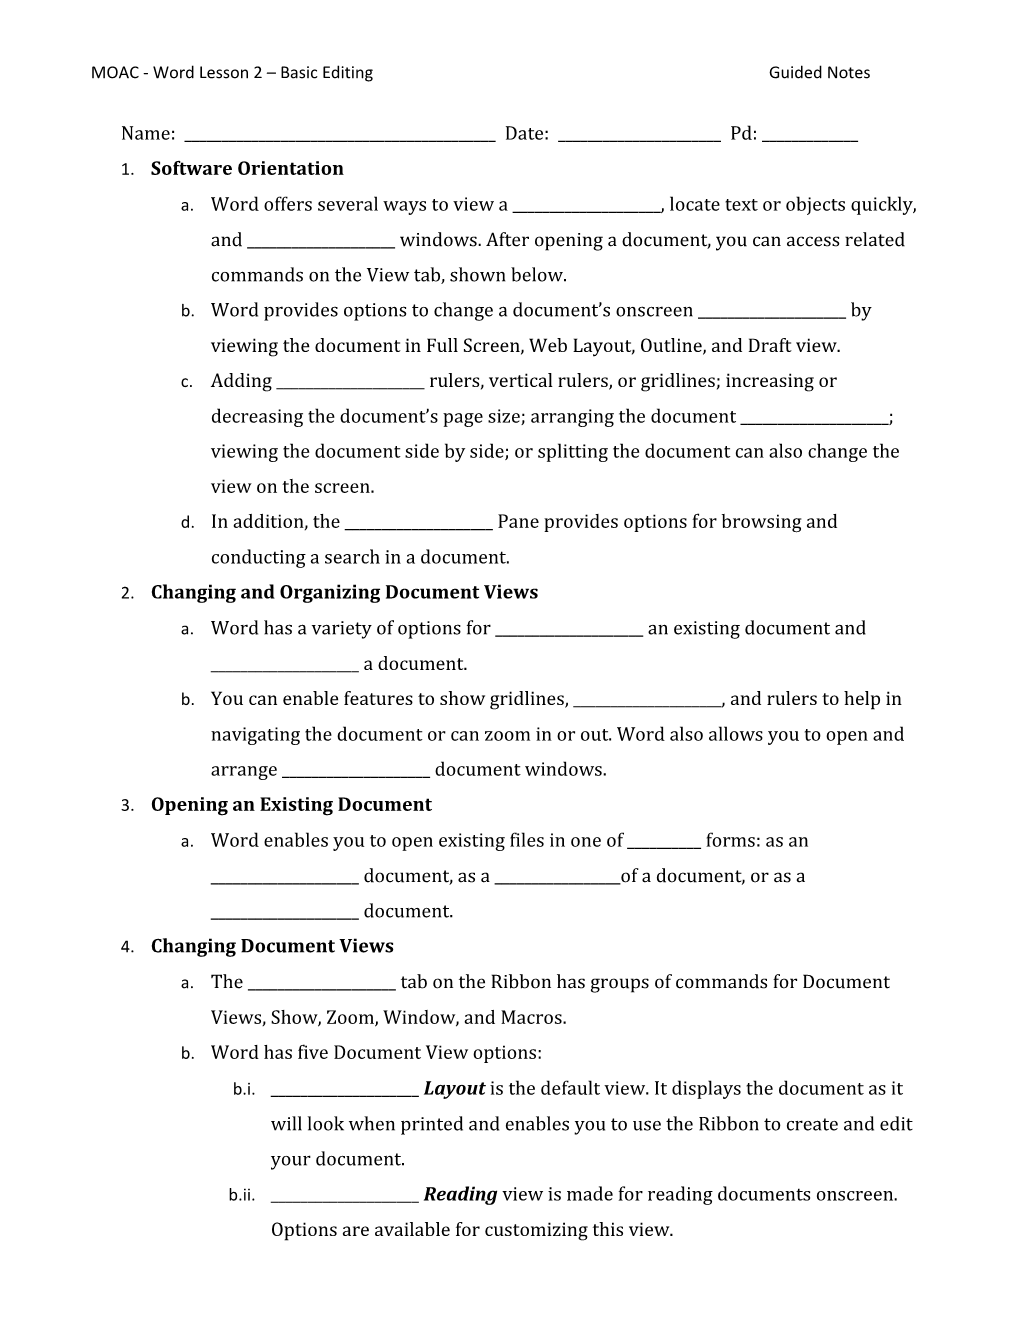 MOAC - Word Lesson 2 Basic Editing Guided Notes